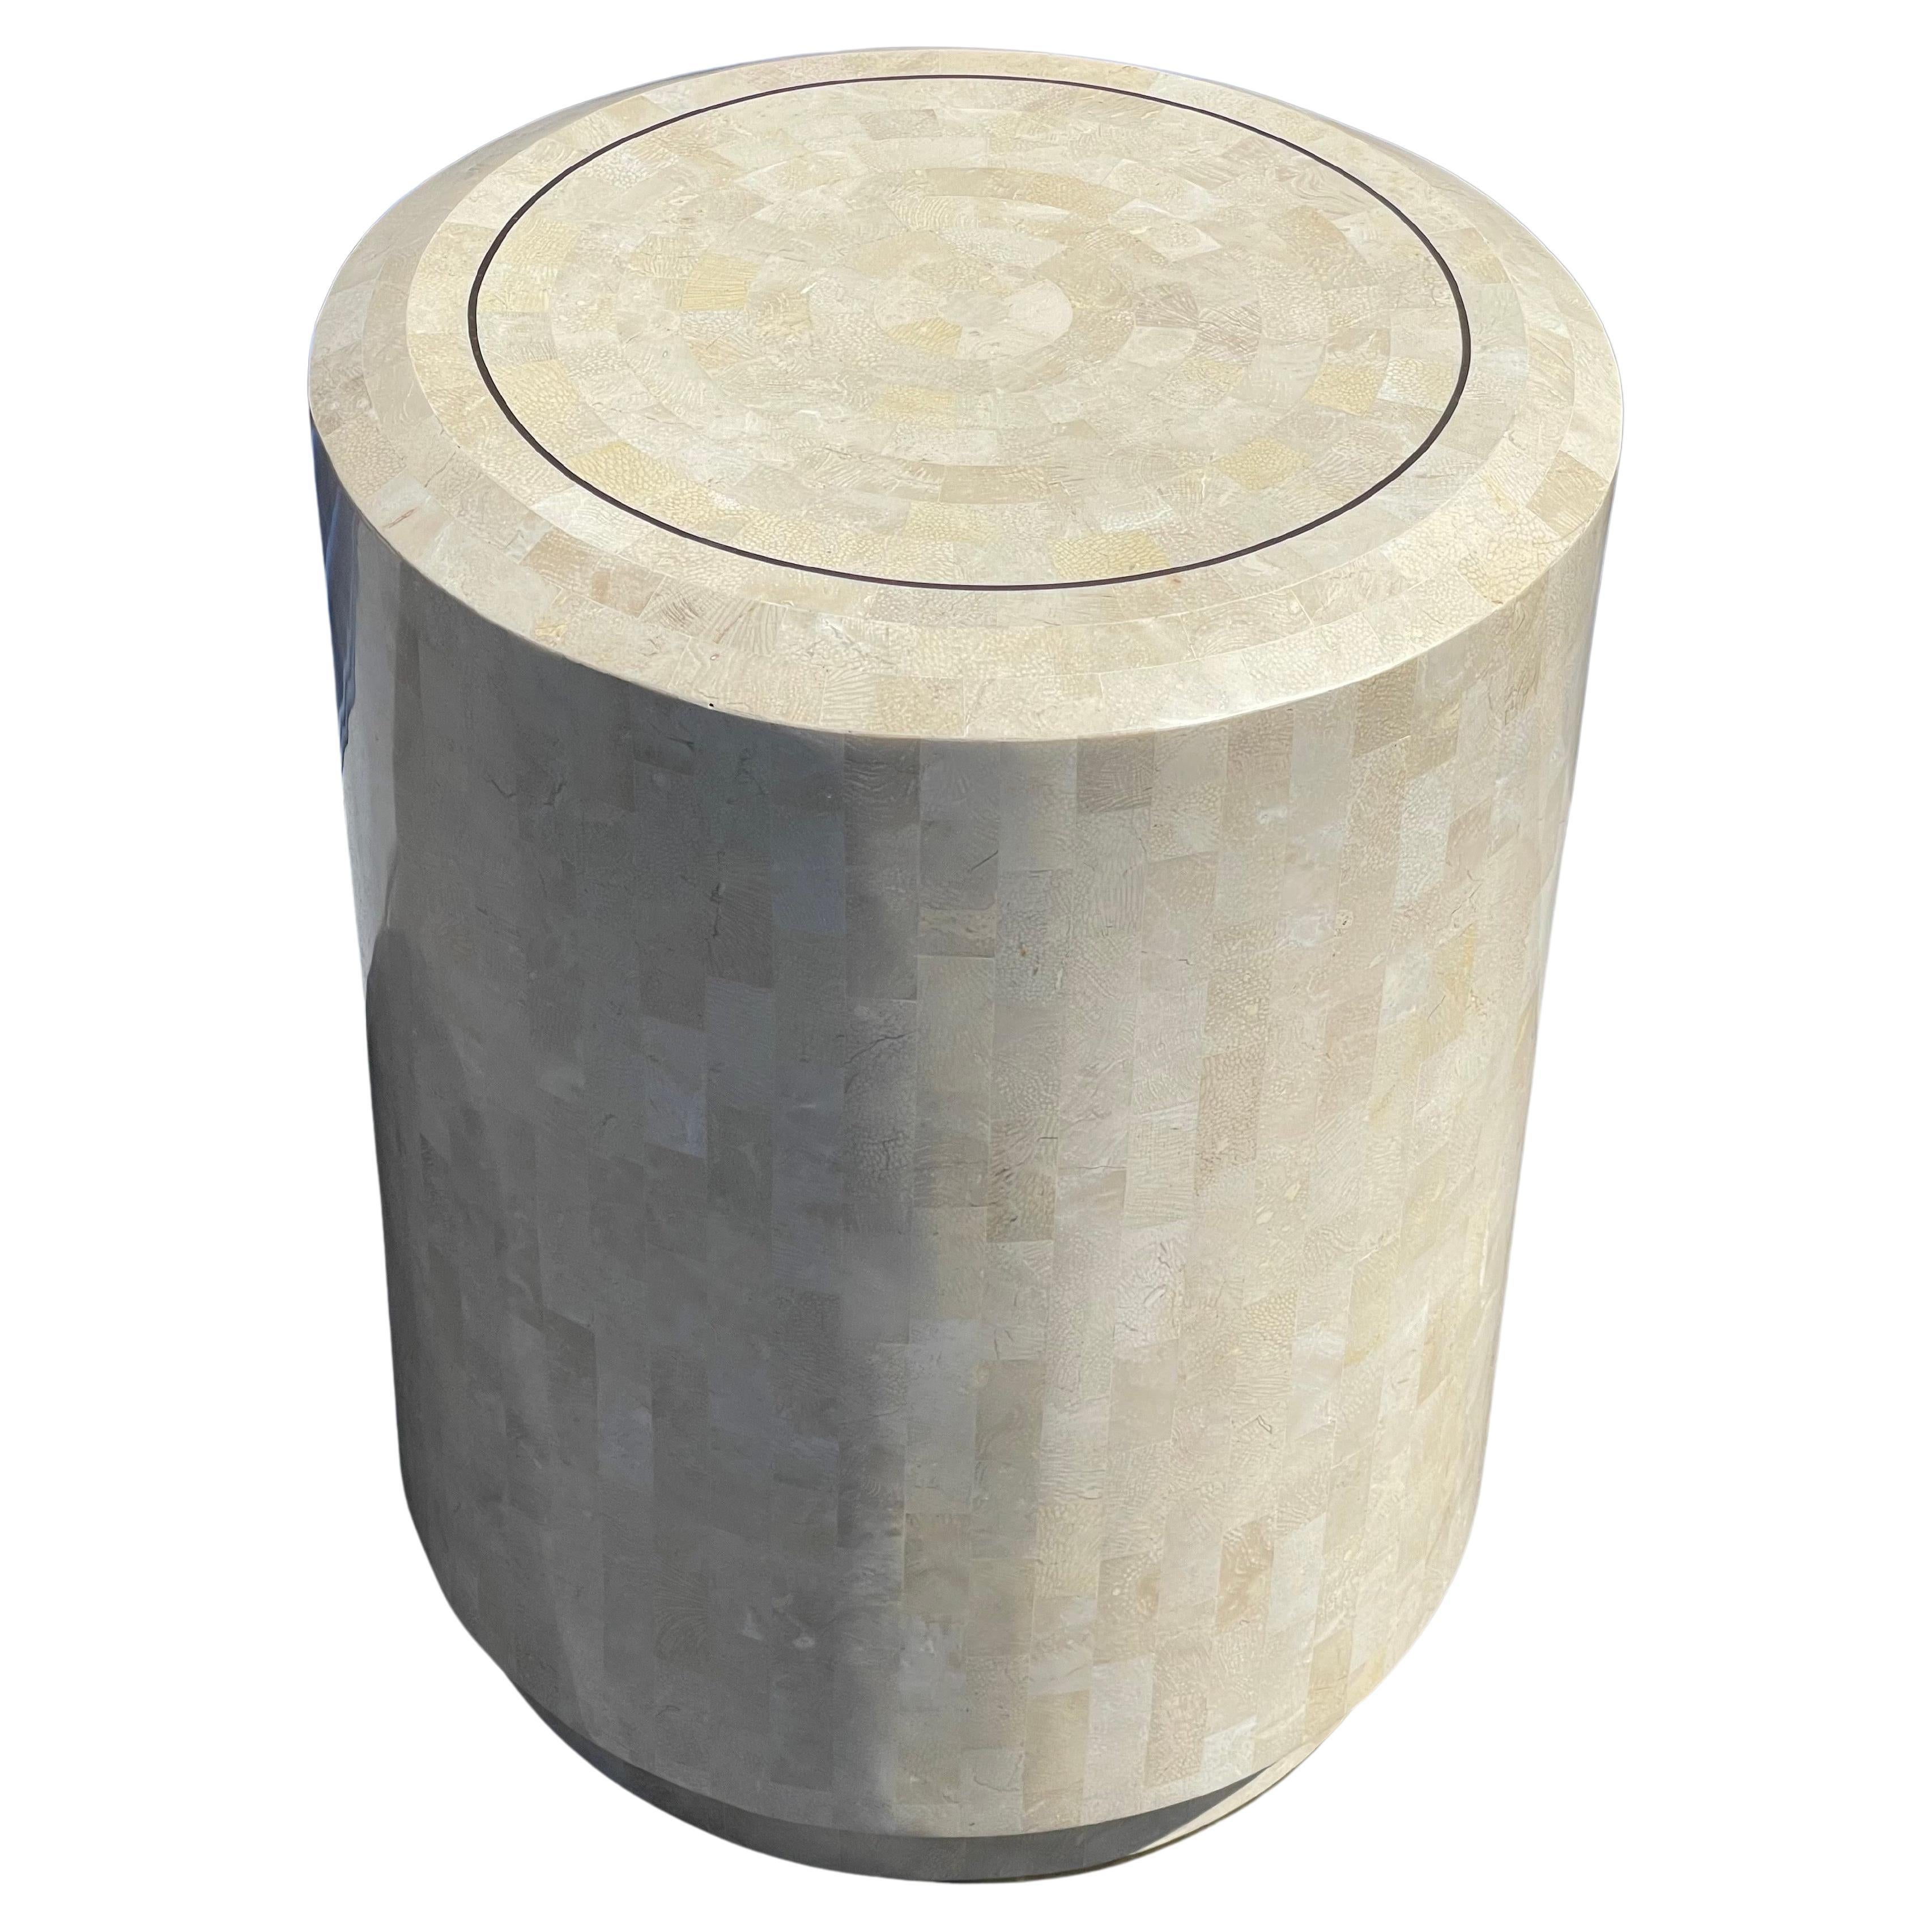 Tessellated Stone Pedestal / Side Table with Brass Accents by Maitland Smith For Sale